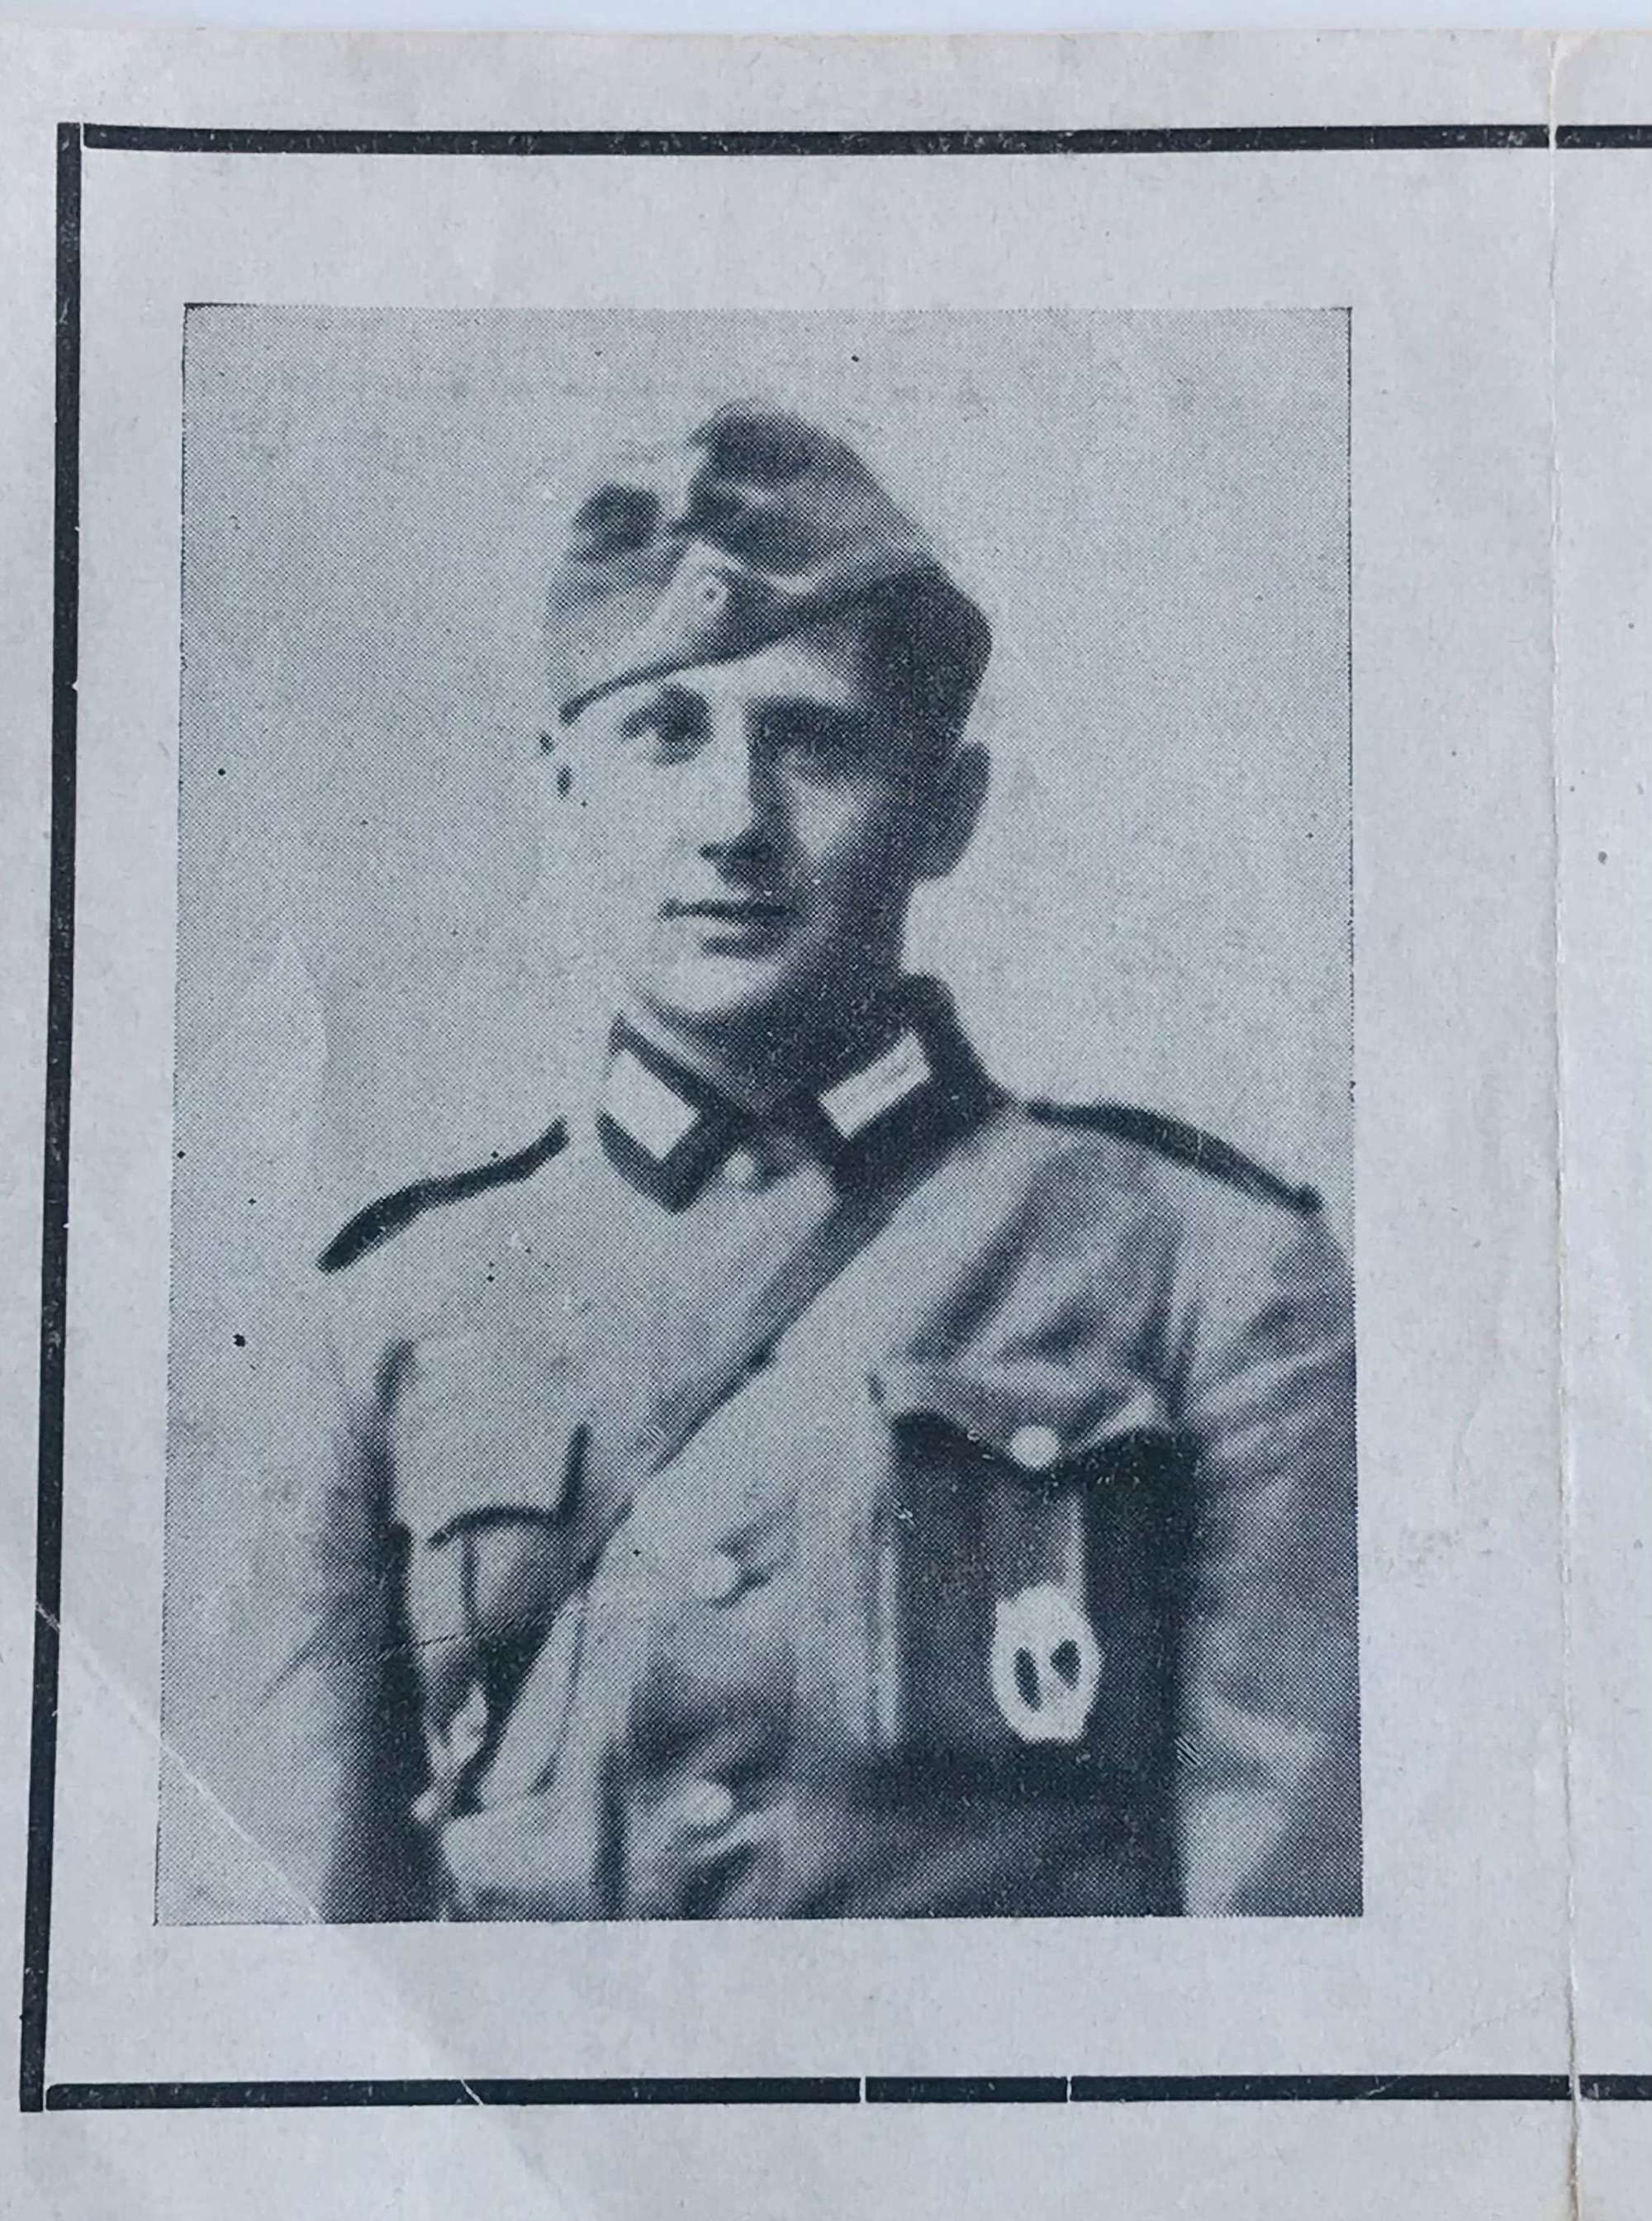 German memorial card killed in action, Normandy, August 44